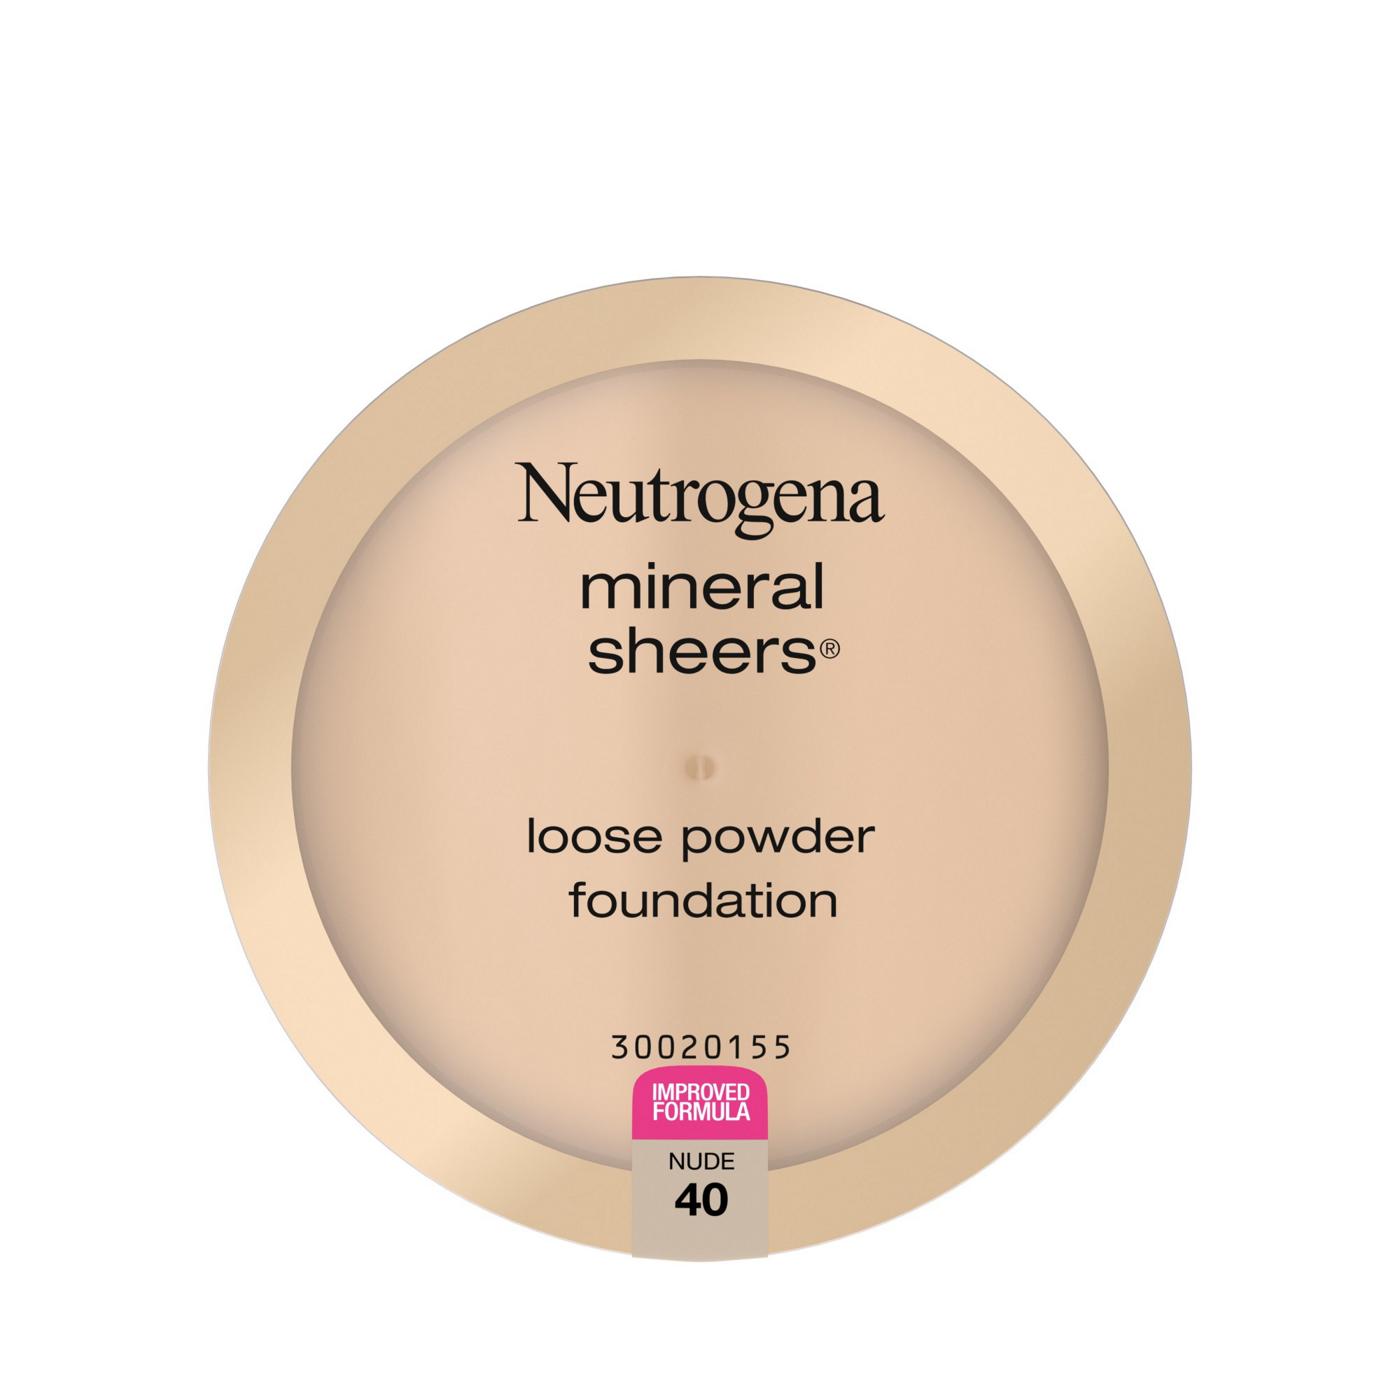 Neutrogena Mineral Sheers Loose Powder Foundation 40 Nude; image 1 of 5